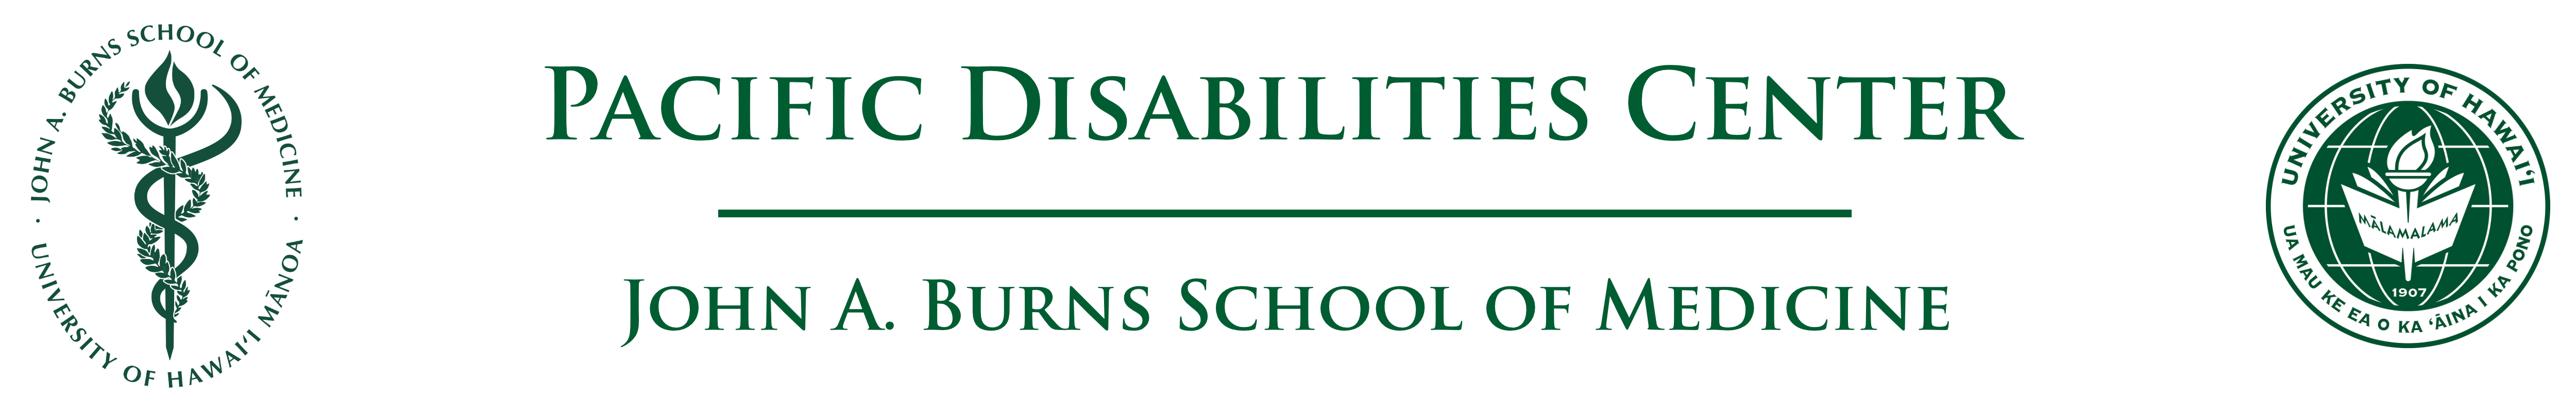 Pacific Disabilities Center